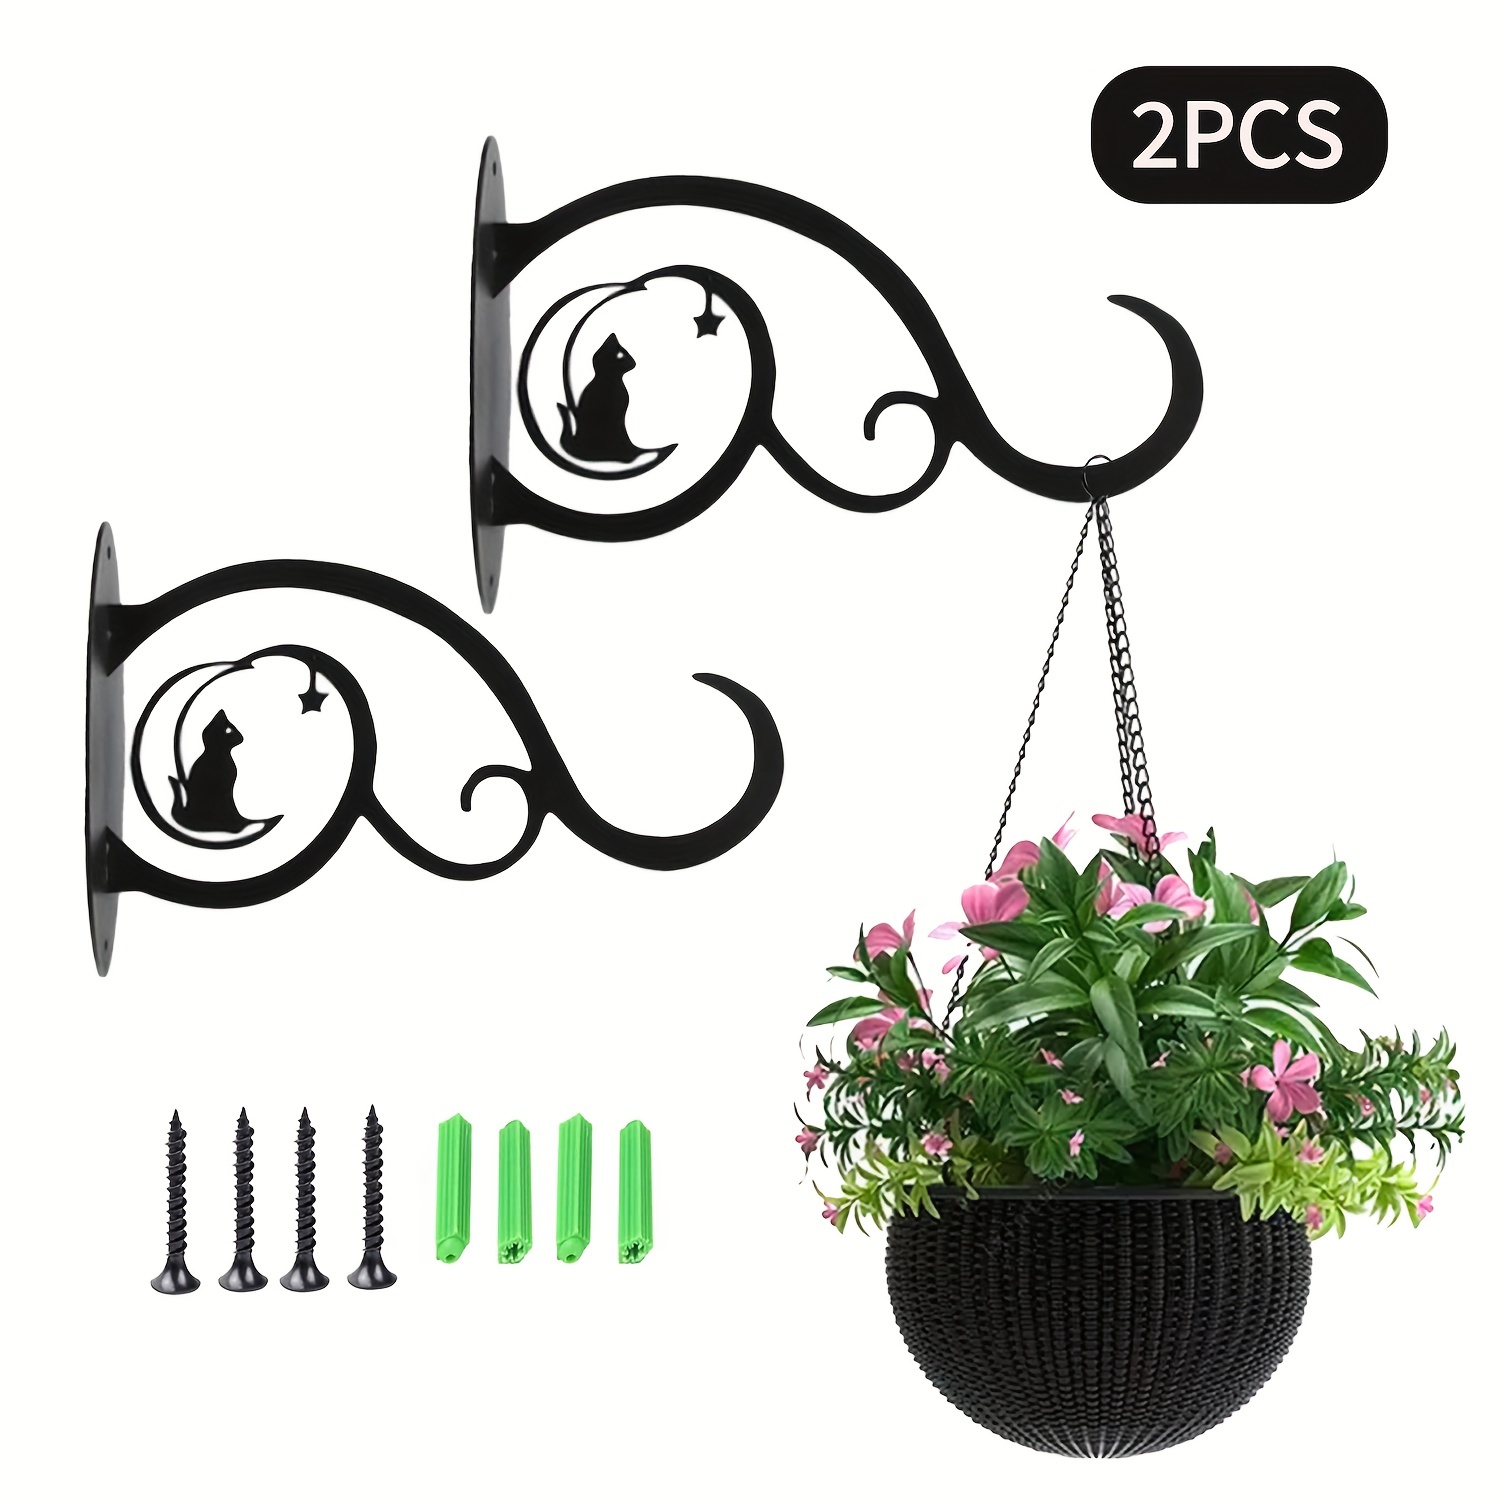 5 Inch Outdoor Decorative Iron Small Plant Lantern Hooks for Wall